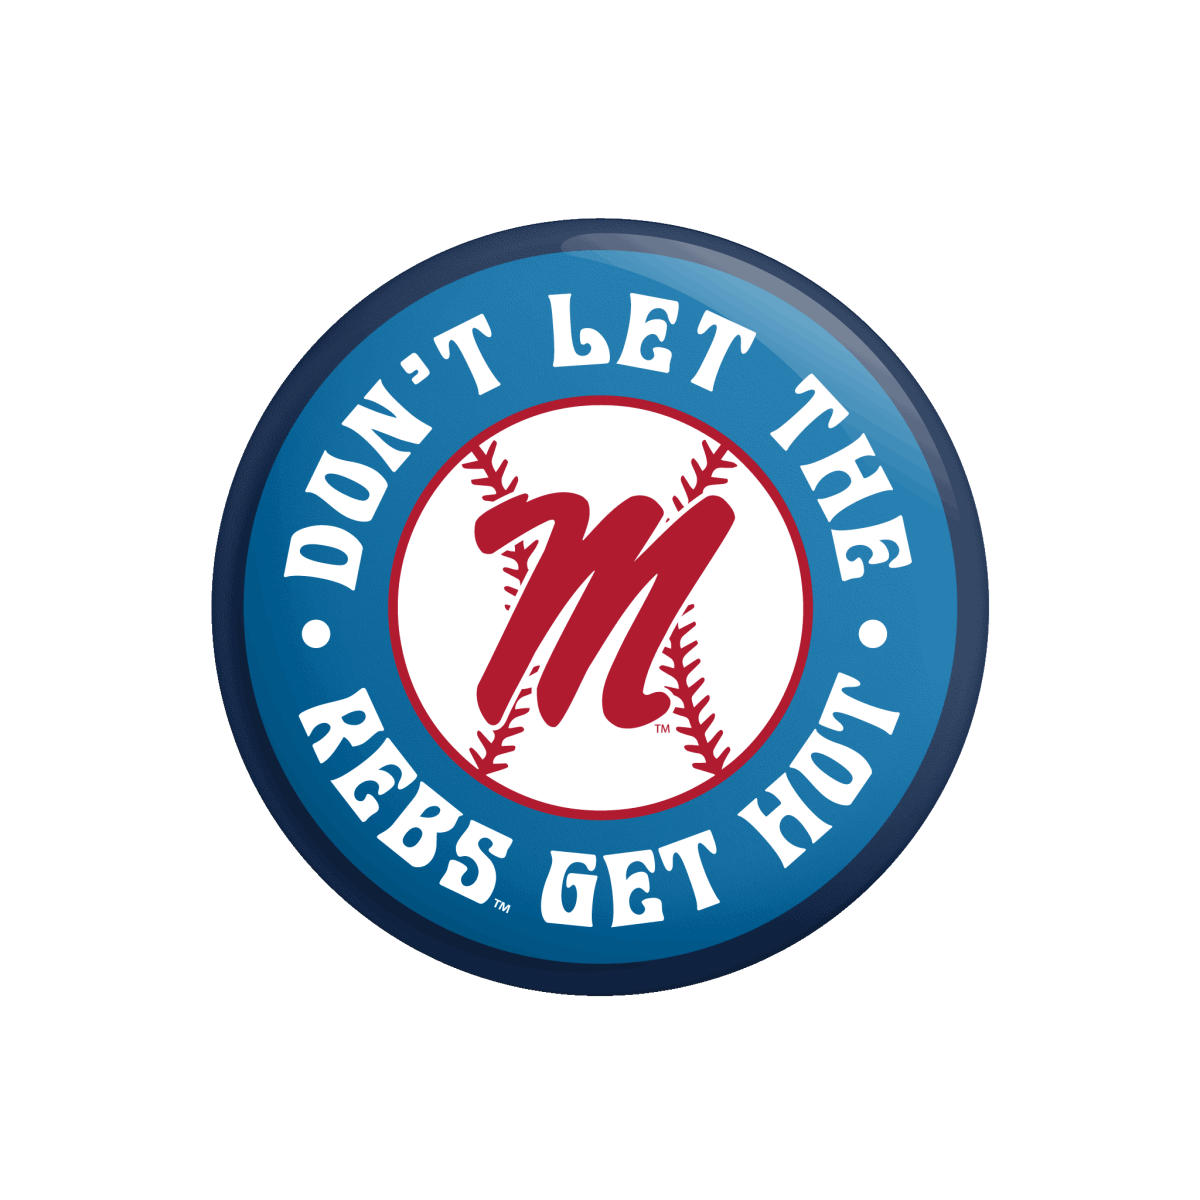 Don't Let the Rebs Get Hot Button - Shop B-Unlimited